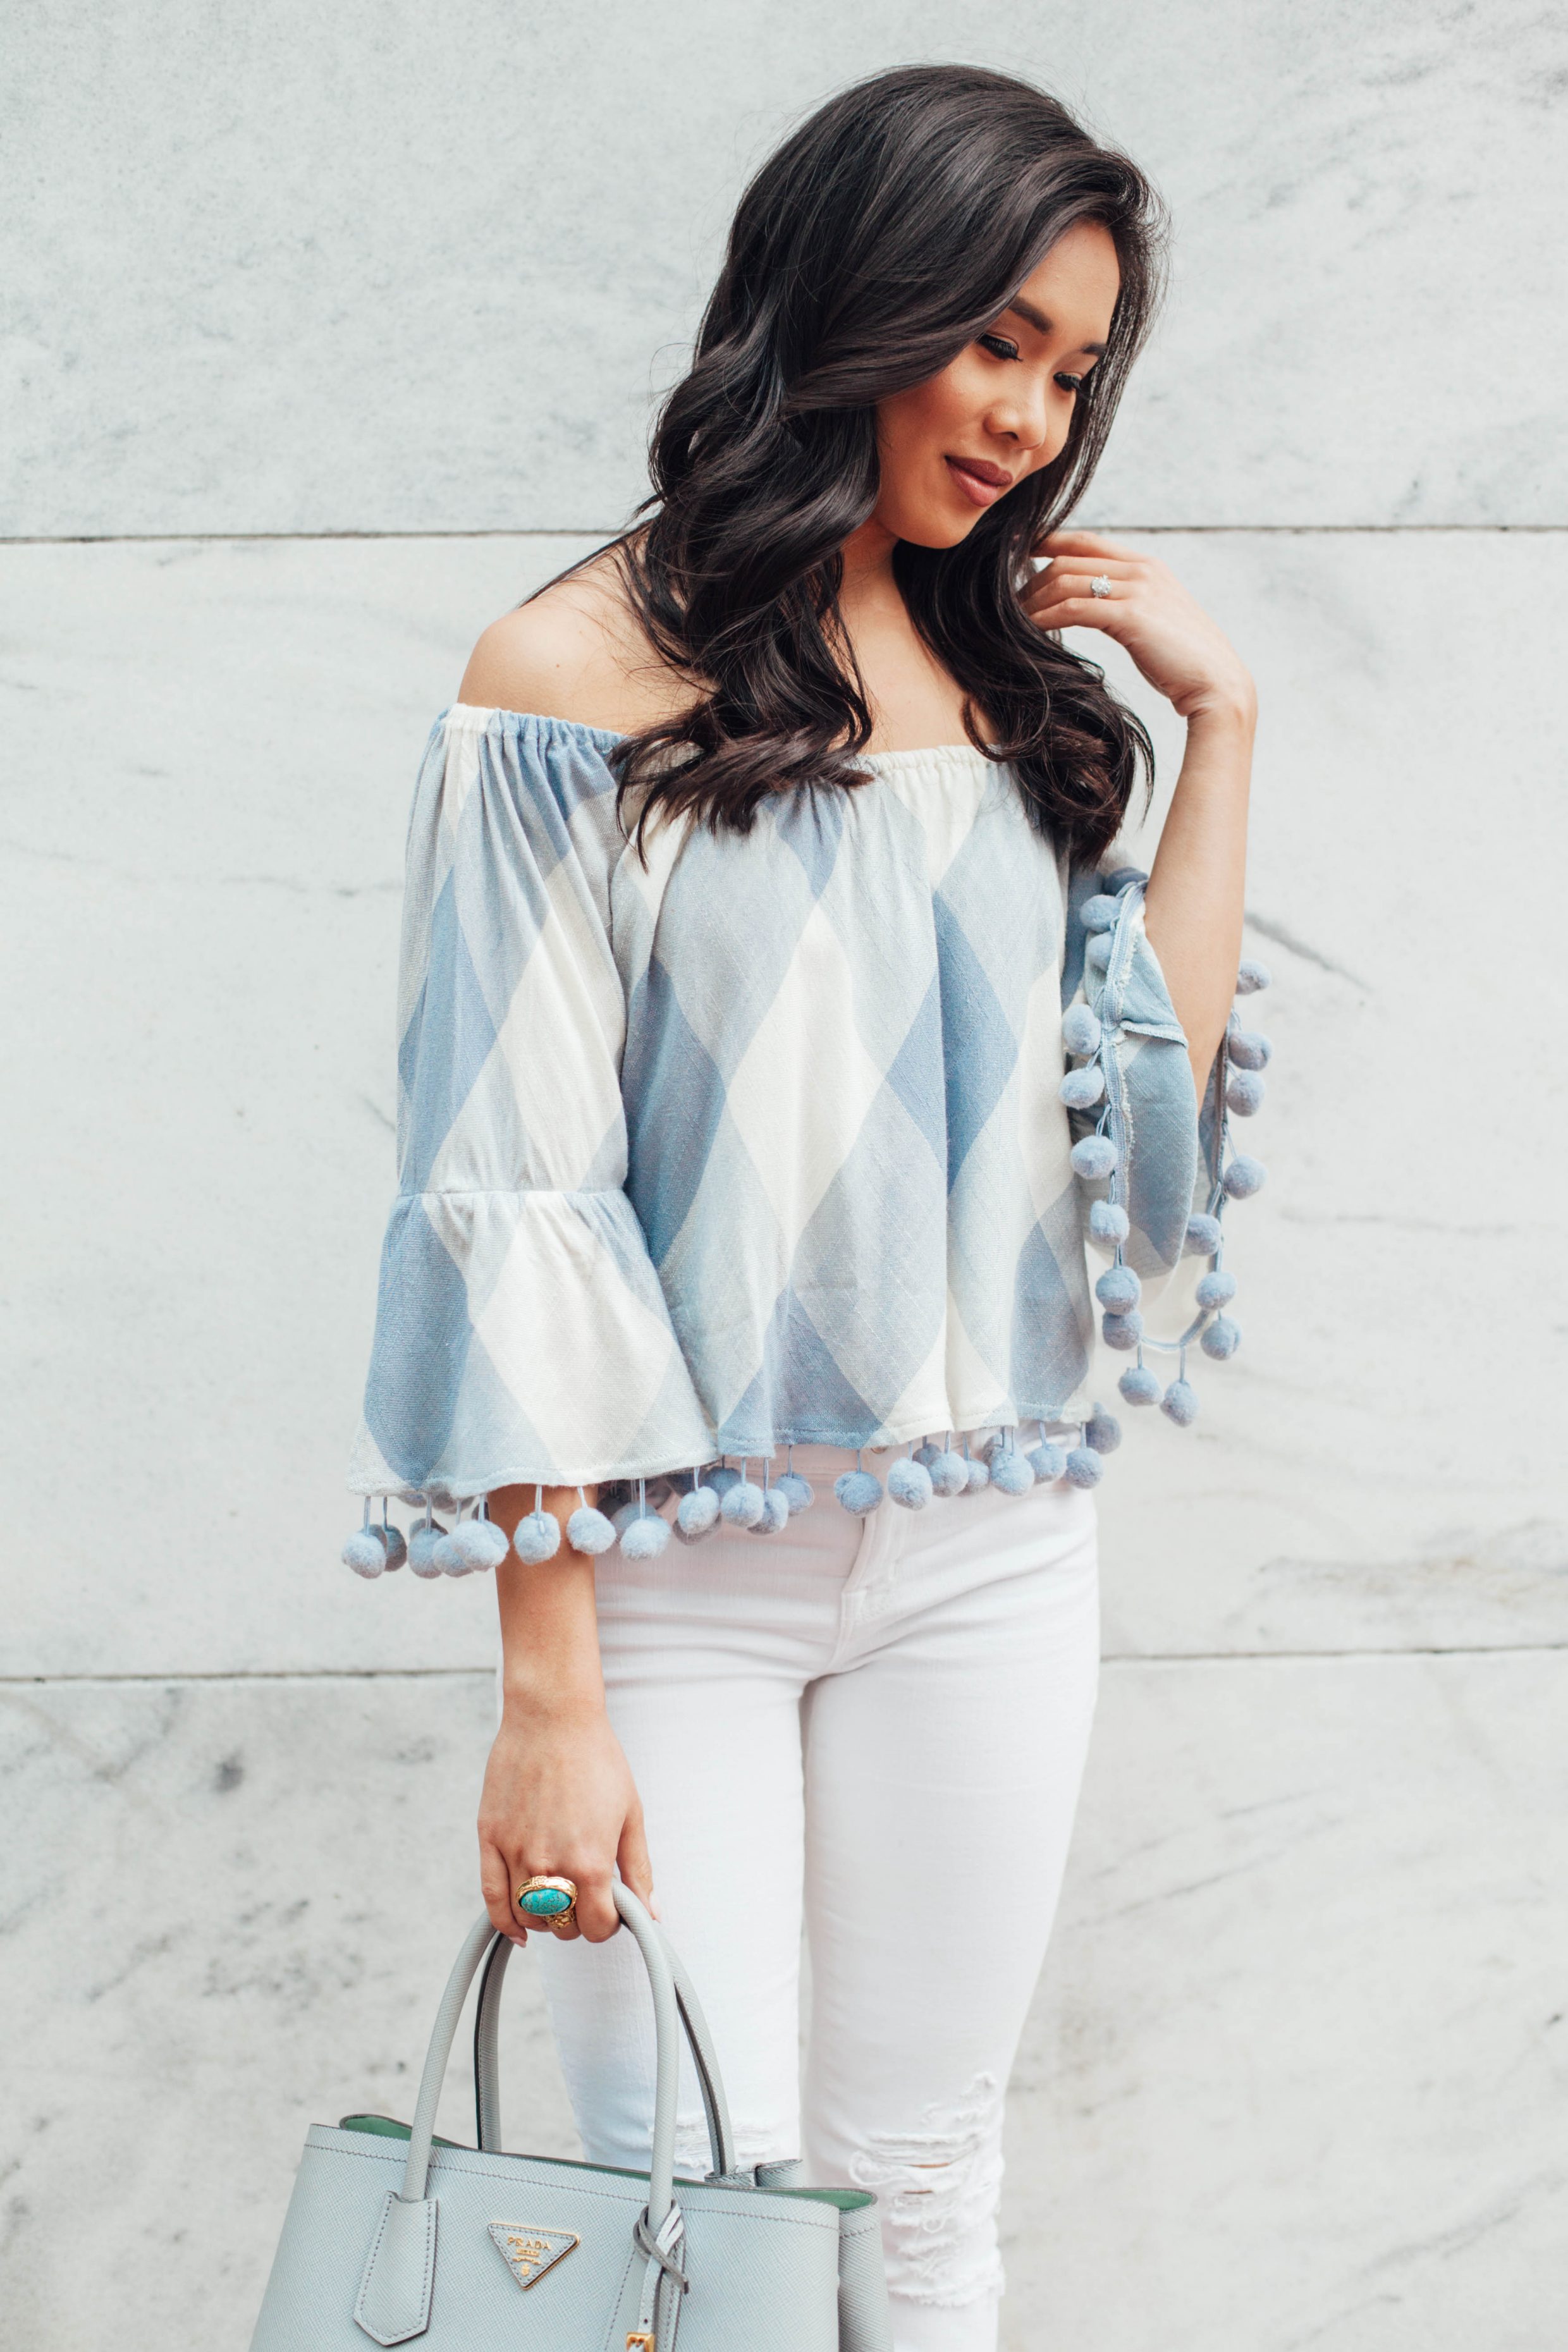 Off the shoulder top with pom pom trim and distressed jeans